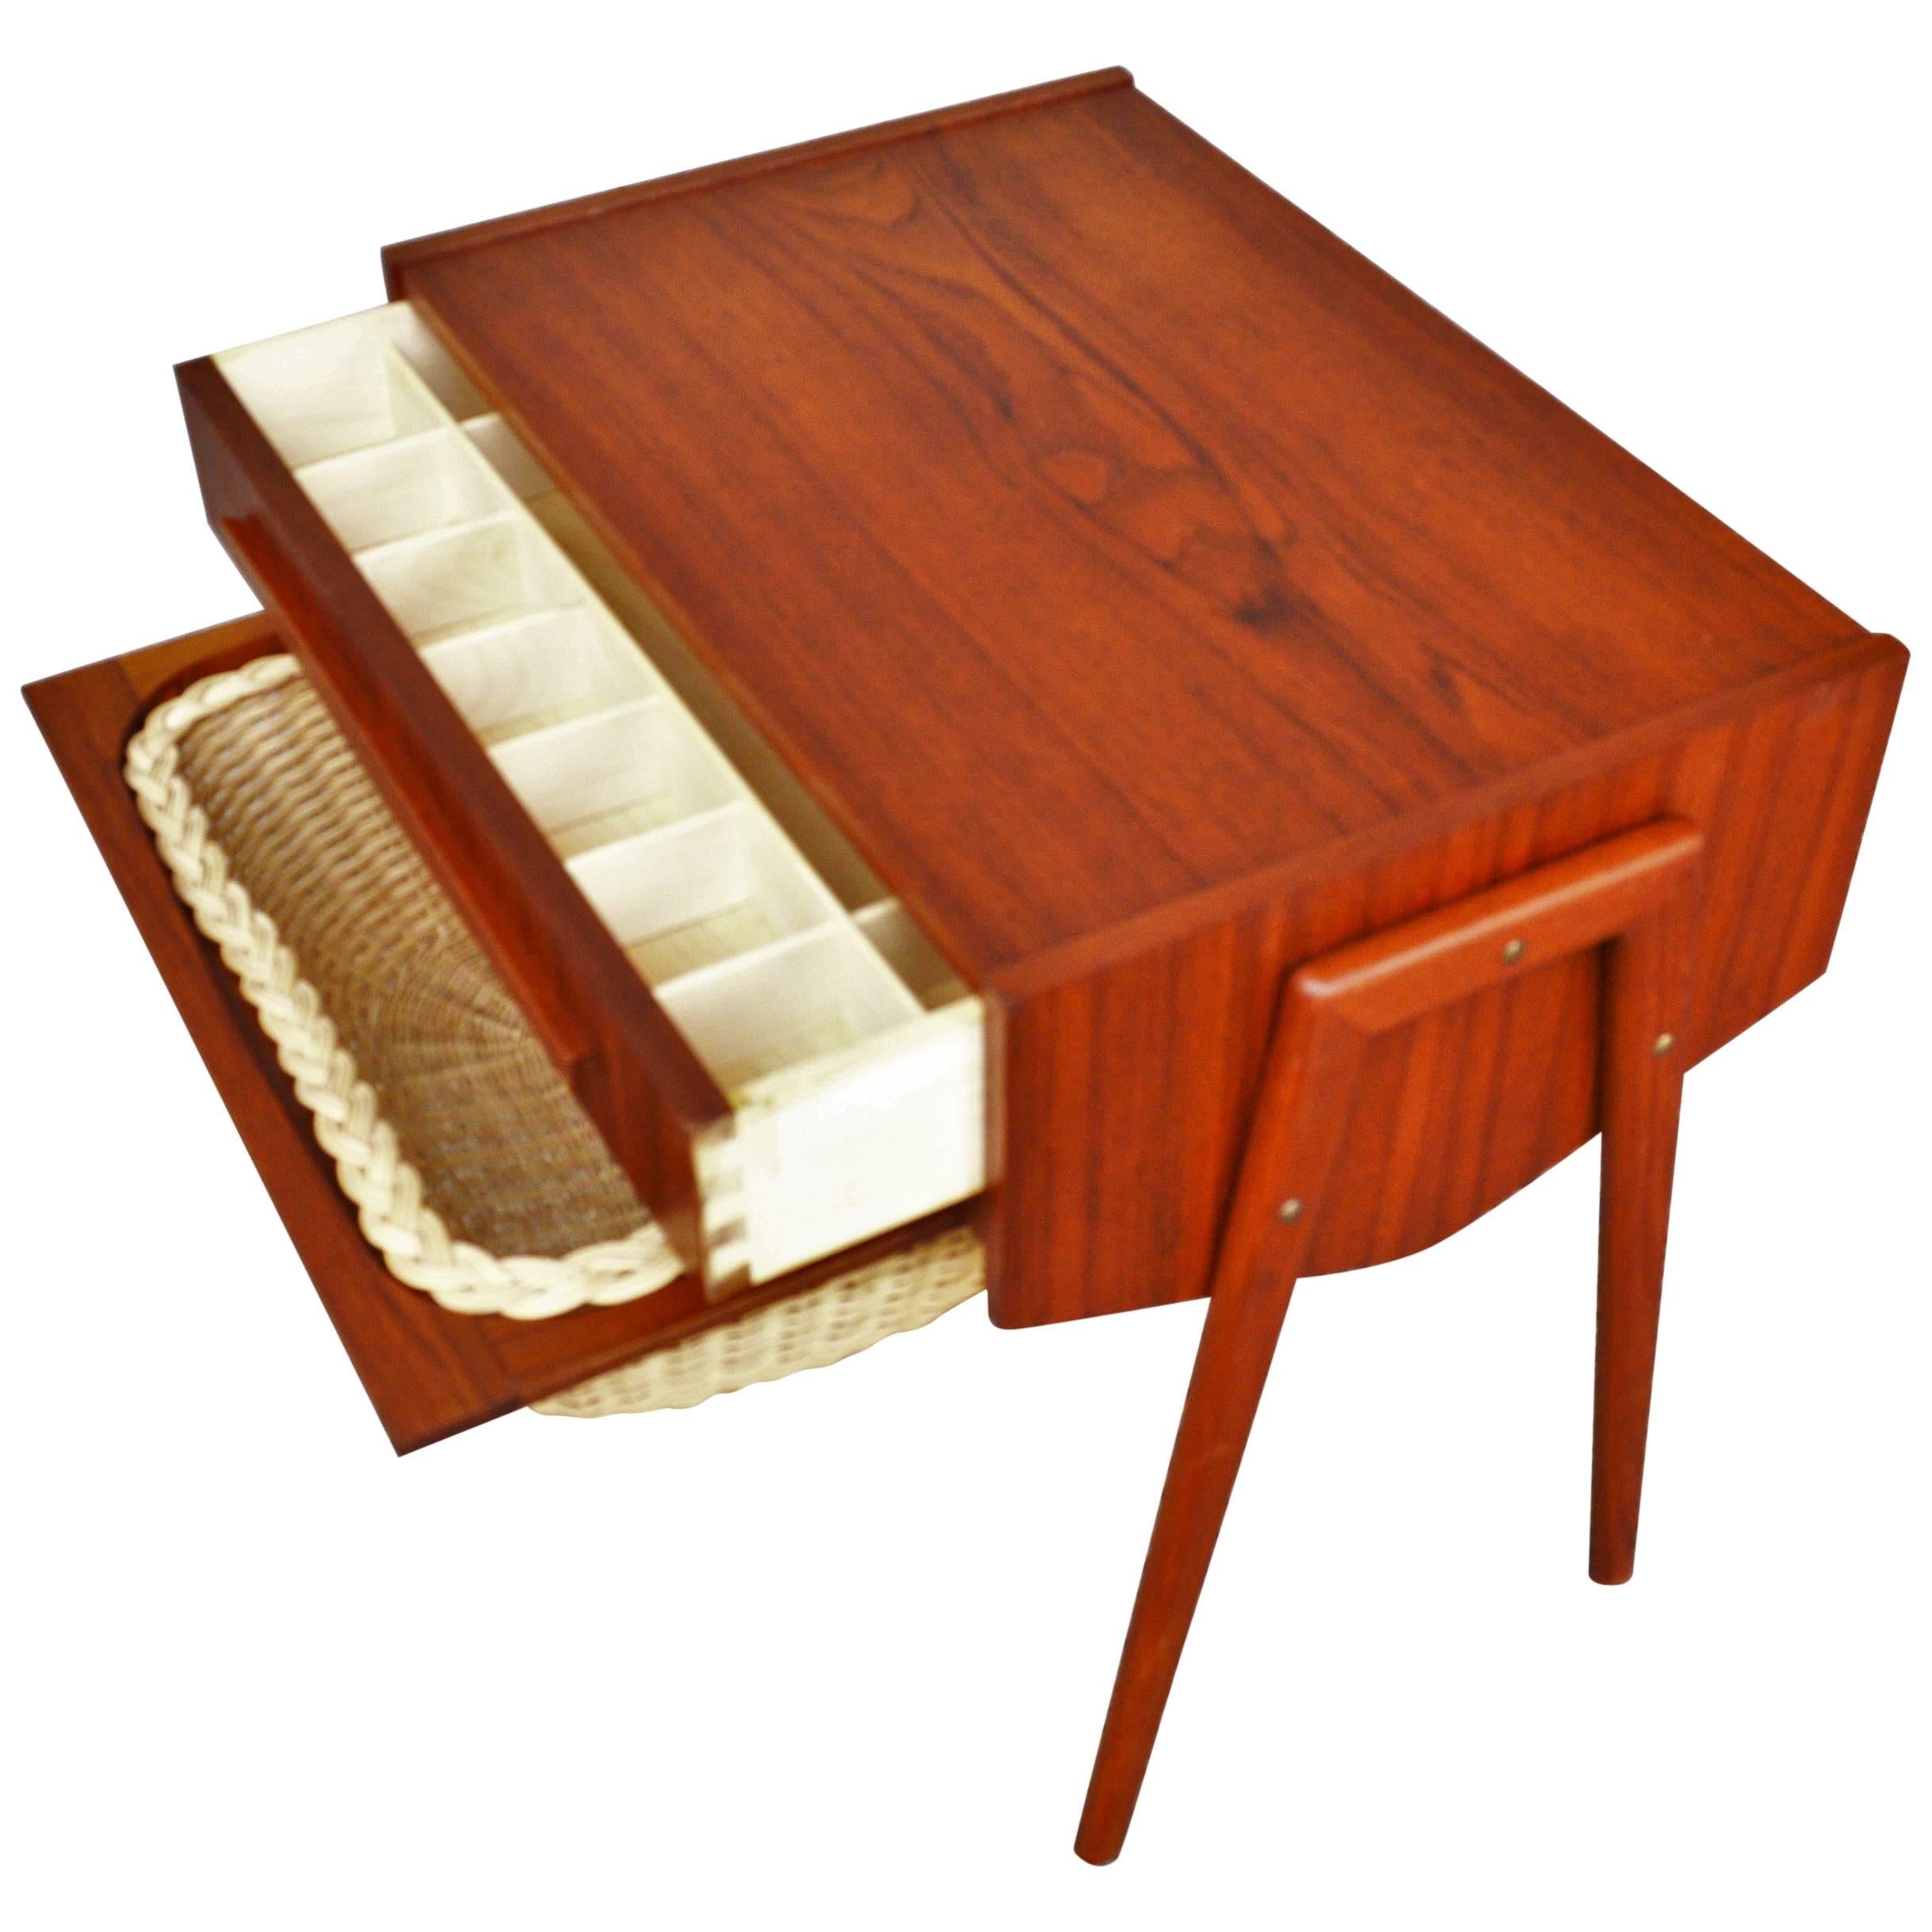 Danish Teak Atomic Style Side Table with Segmented Drawer and Basket